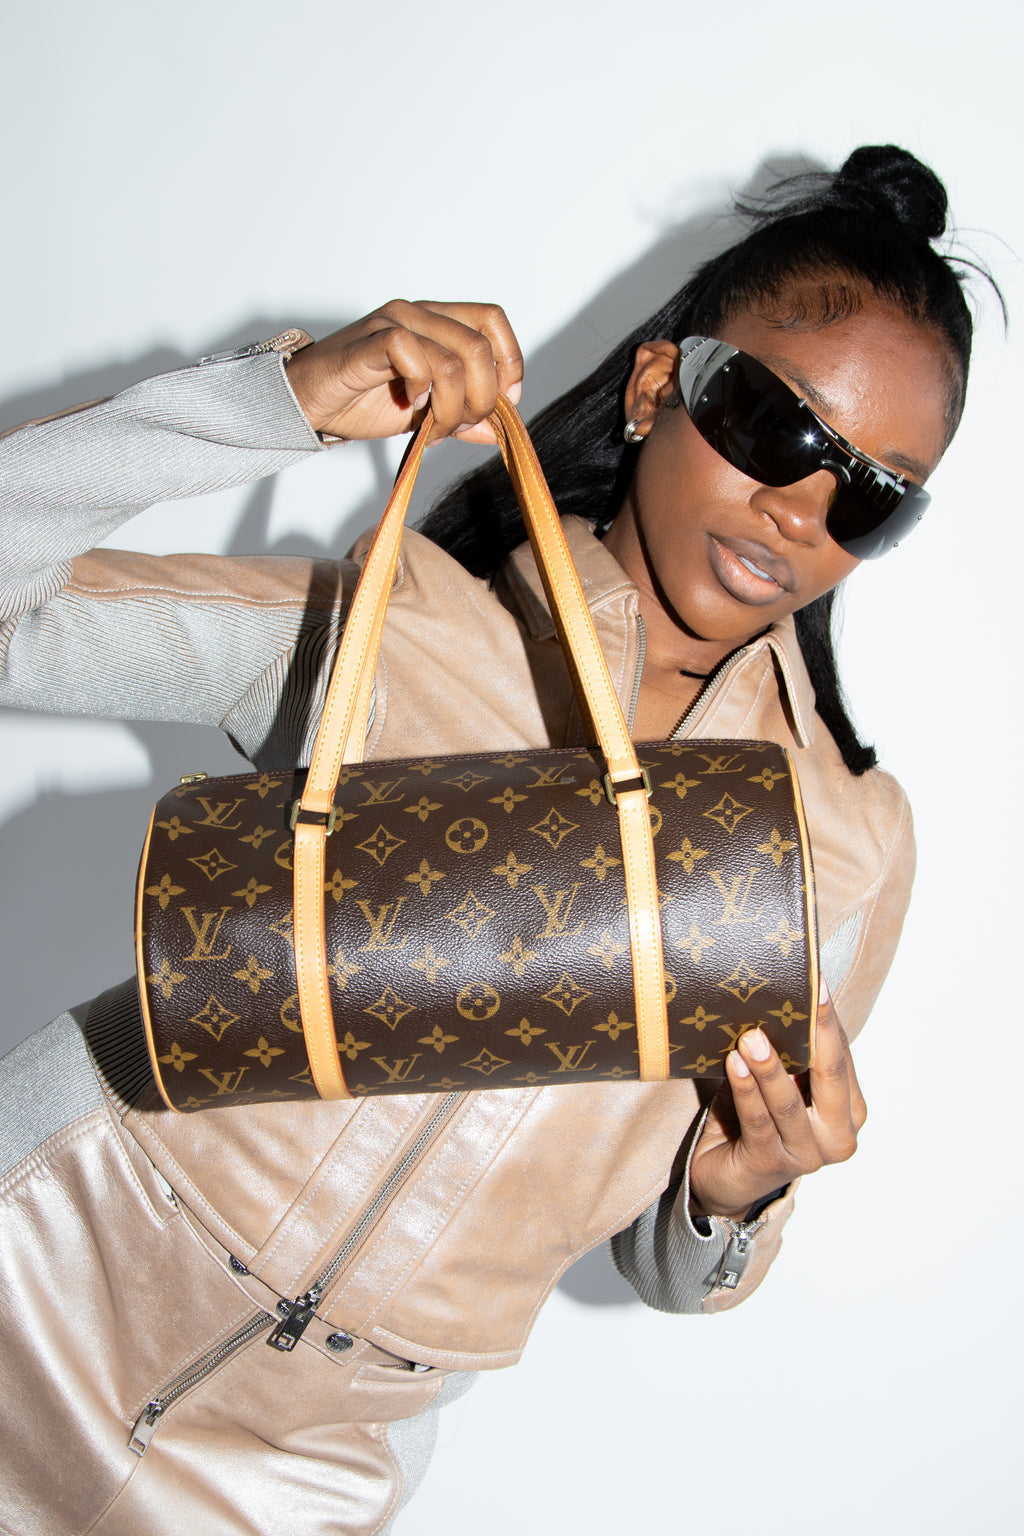 Second-hand Luxury Bags a Winner for Sustainability – Fashion Gone Rogue